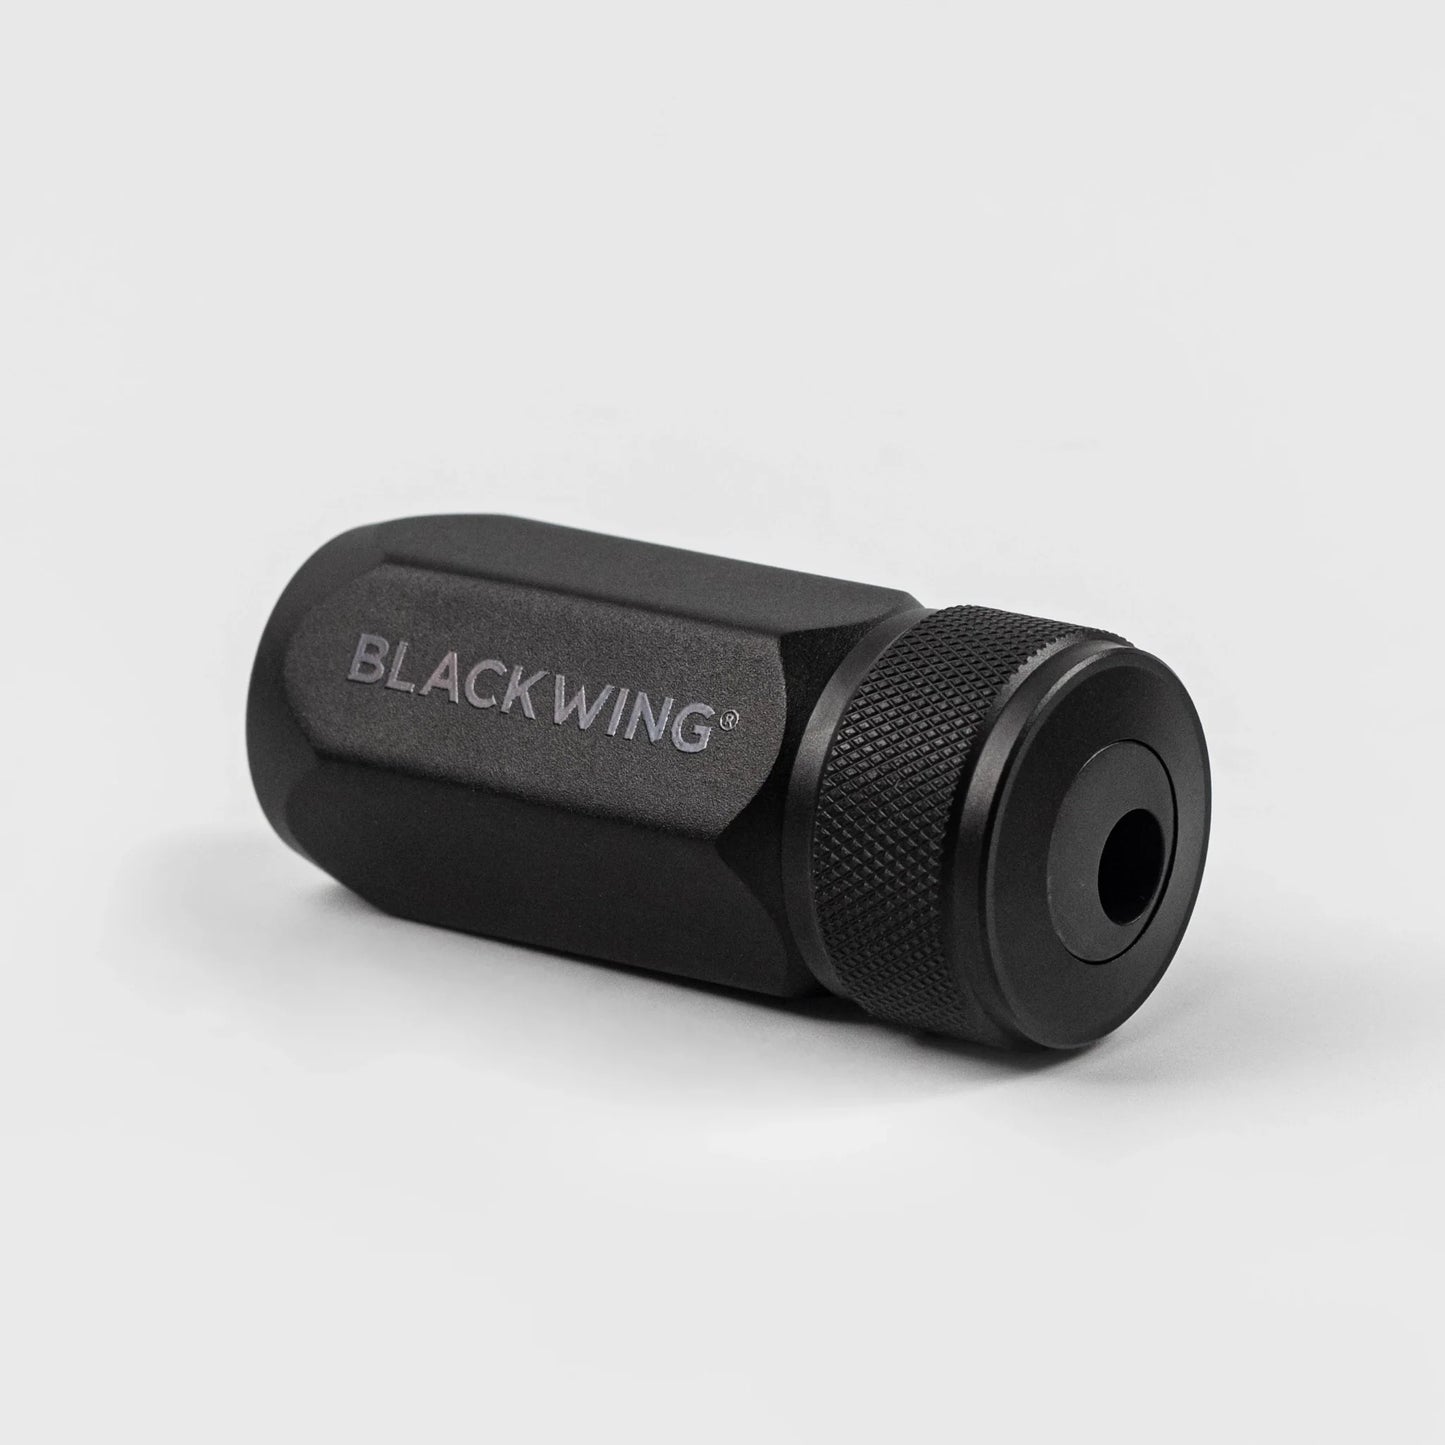 Blackwing One-Step Long Point Sharpeners